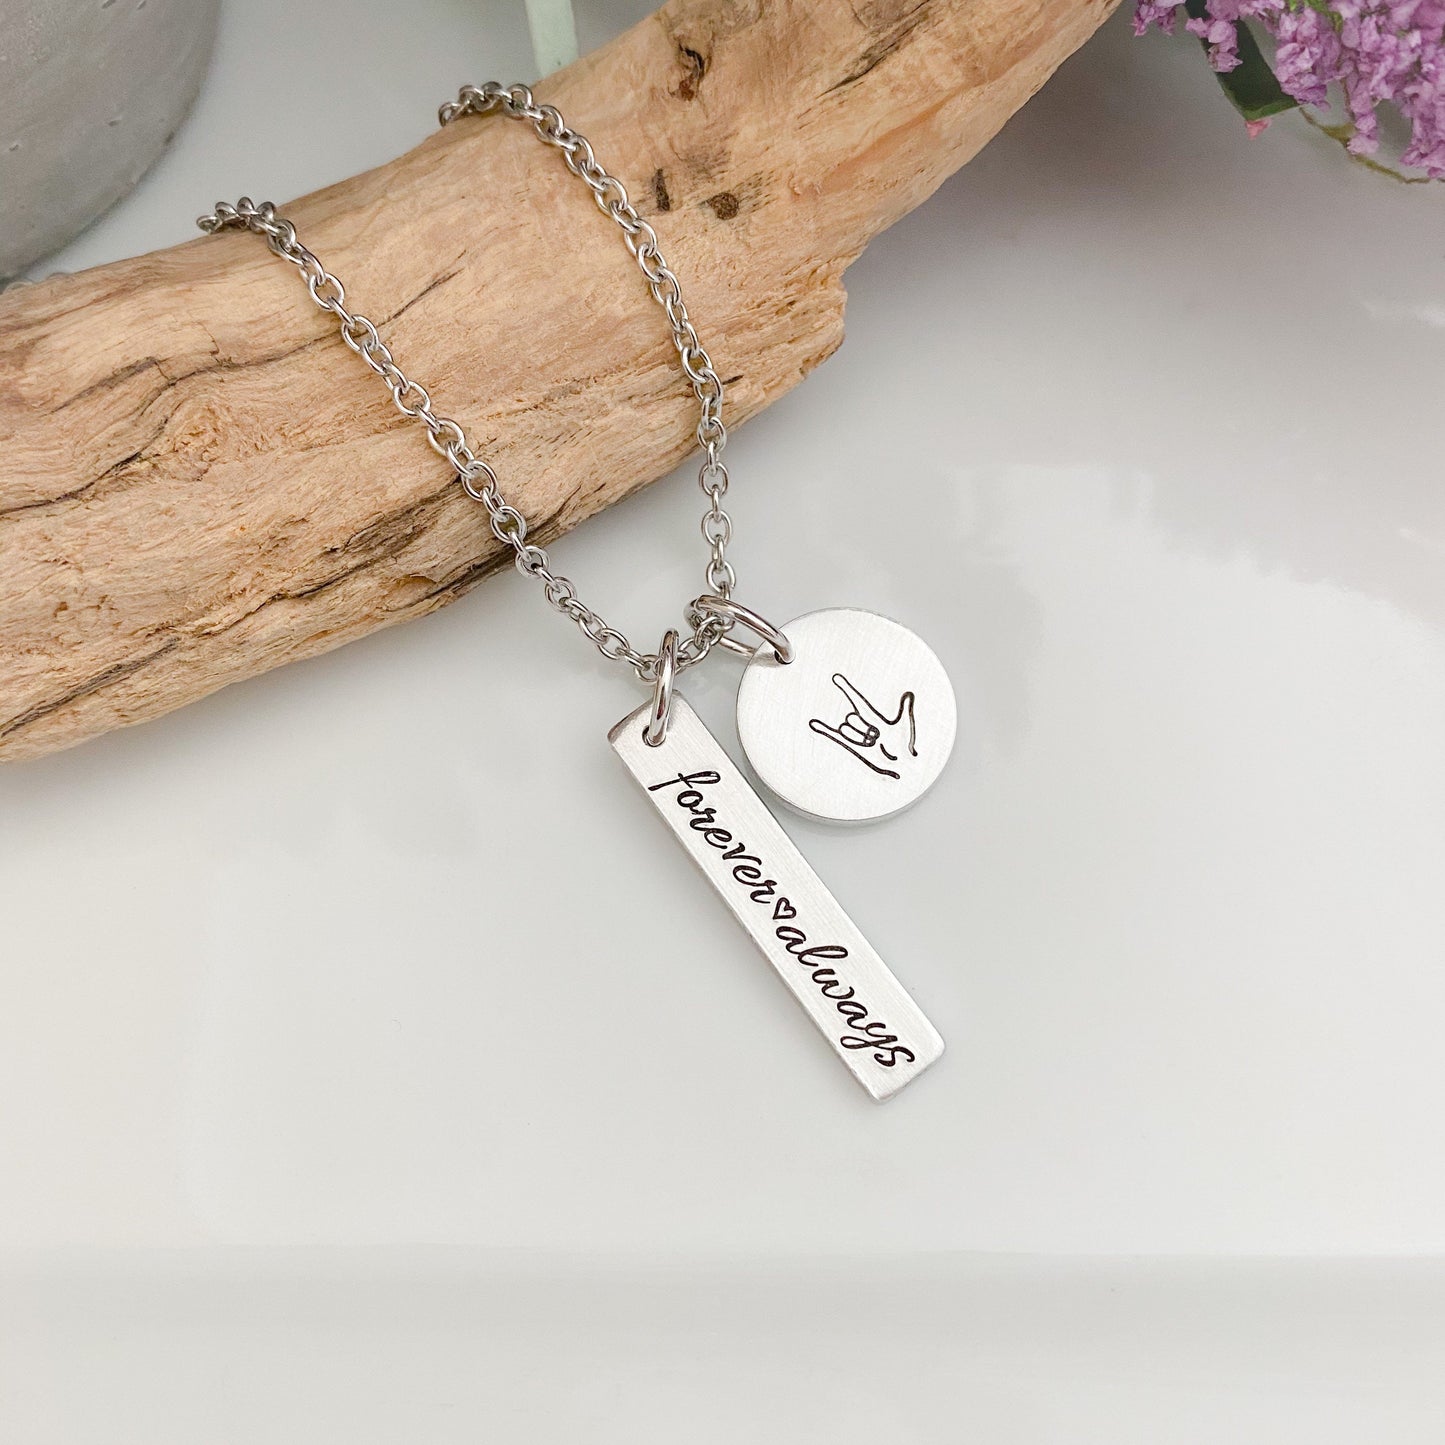 Sign language gift—ASL necklace—I love you necklace—sign language charm necklace—ASL I love you jewelry—hand necklace—forever and always